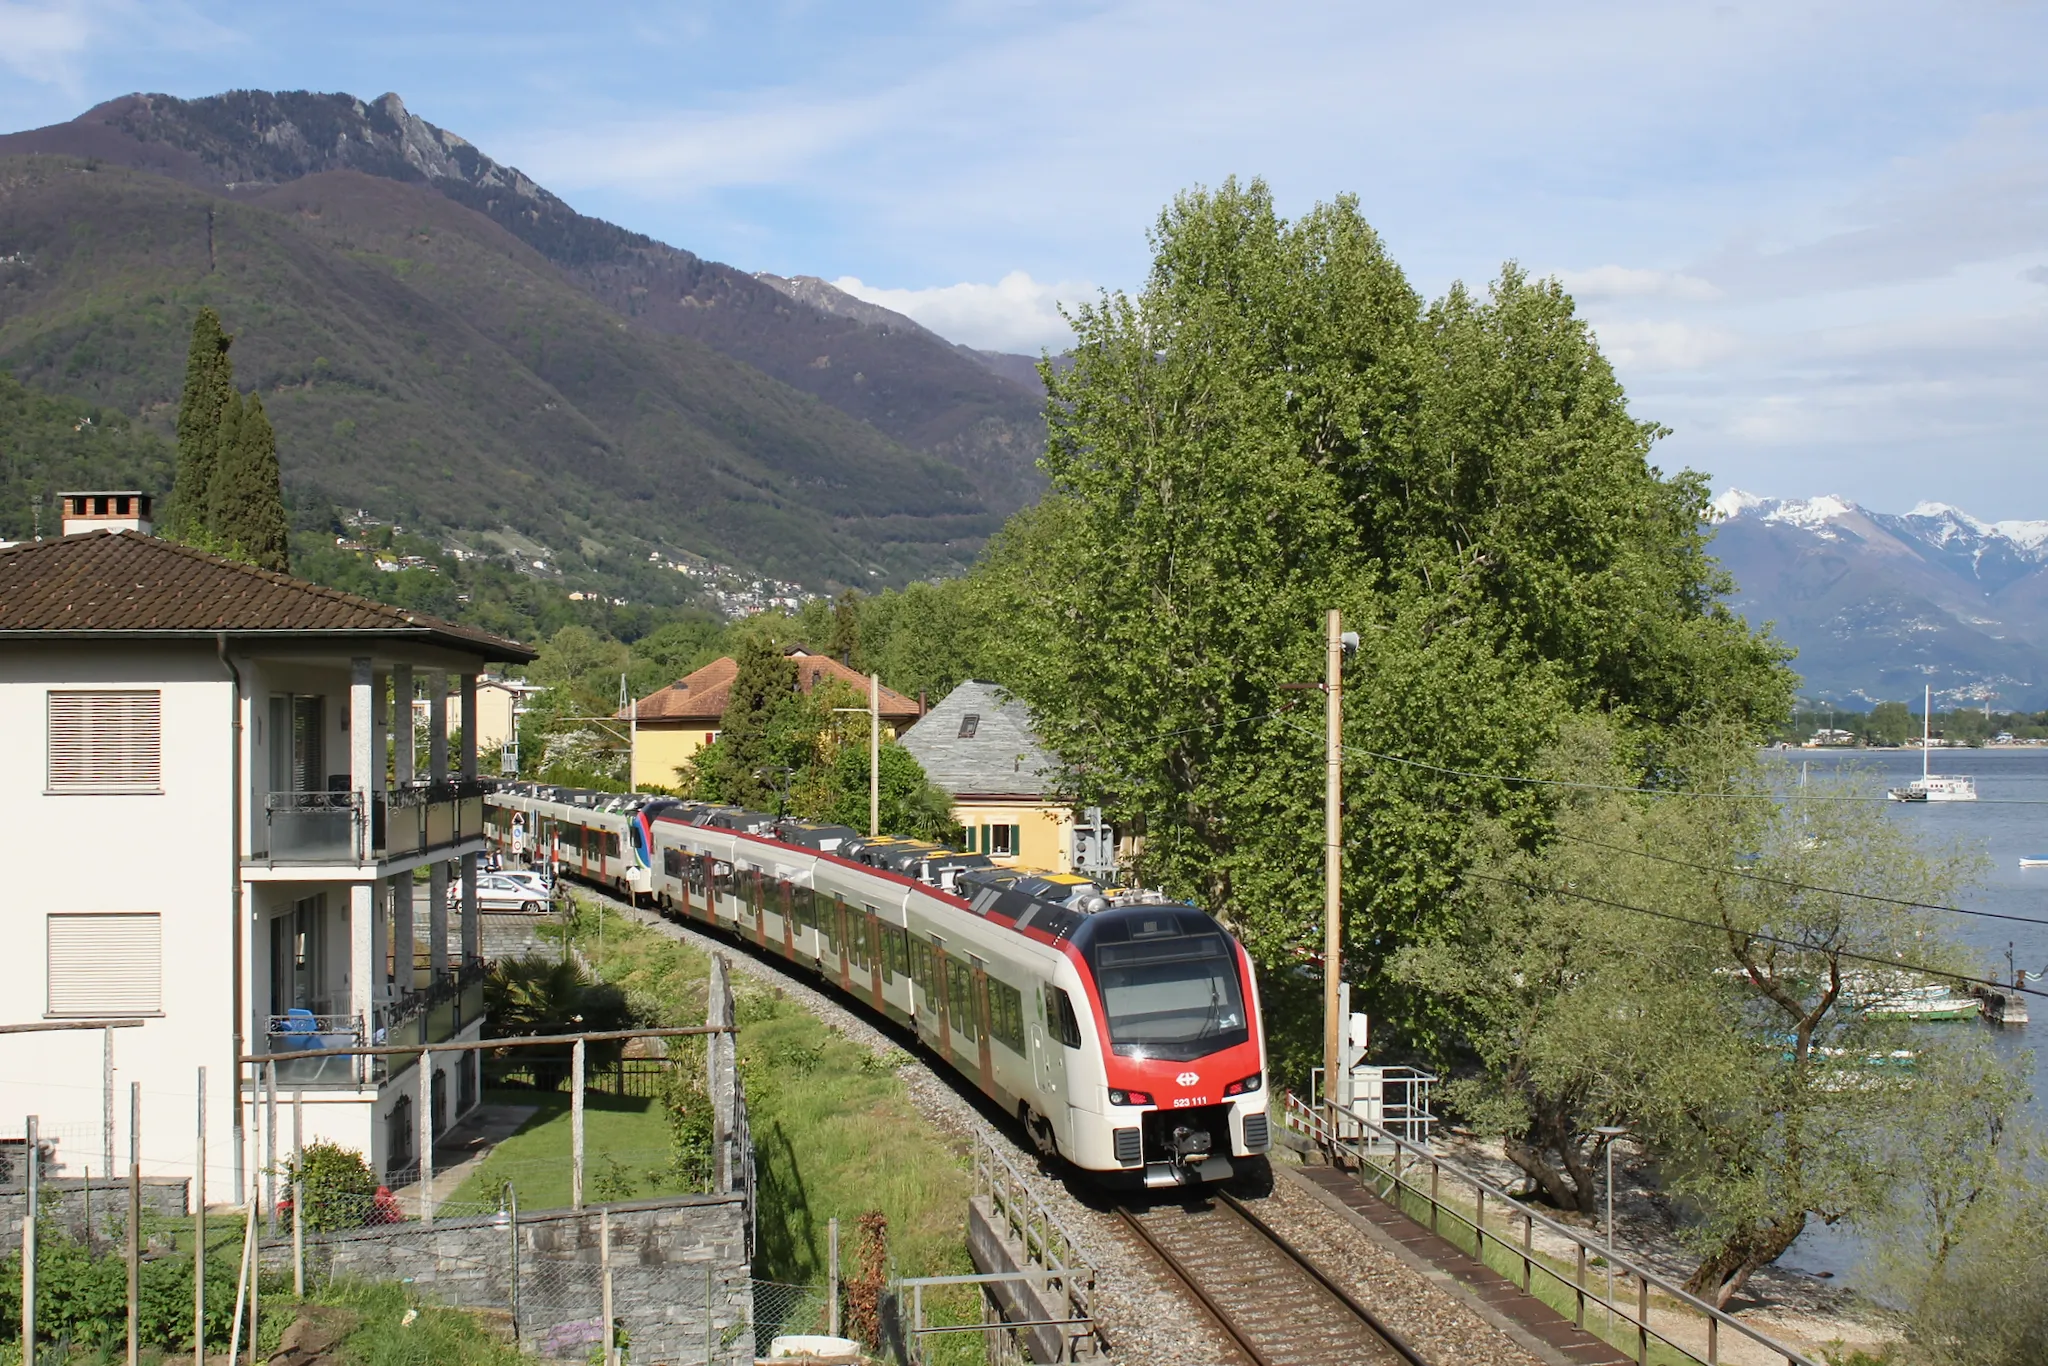 Photo showing: SBB CFF FFS RABe 523 111 at the tail of S20 25666 from Locarno to Castione-Arbedo passing through Minusio.